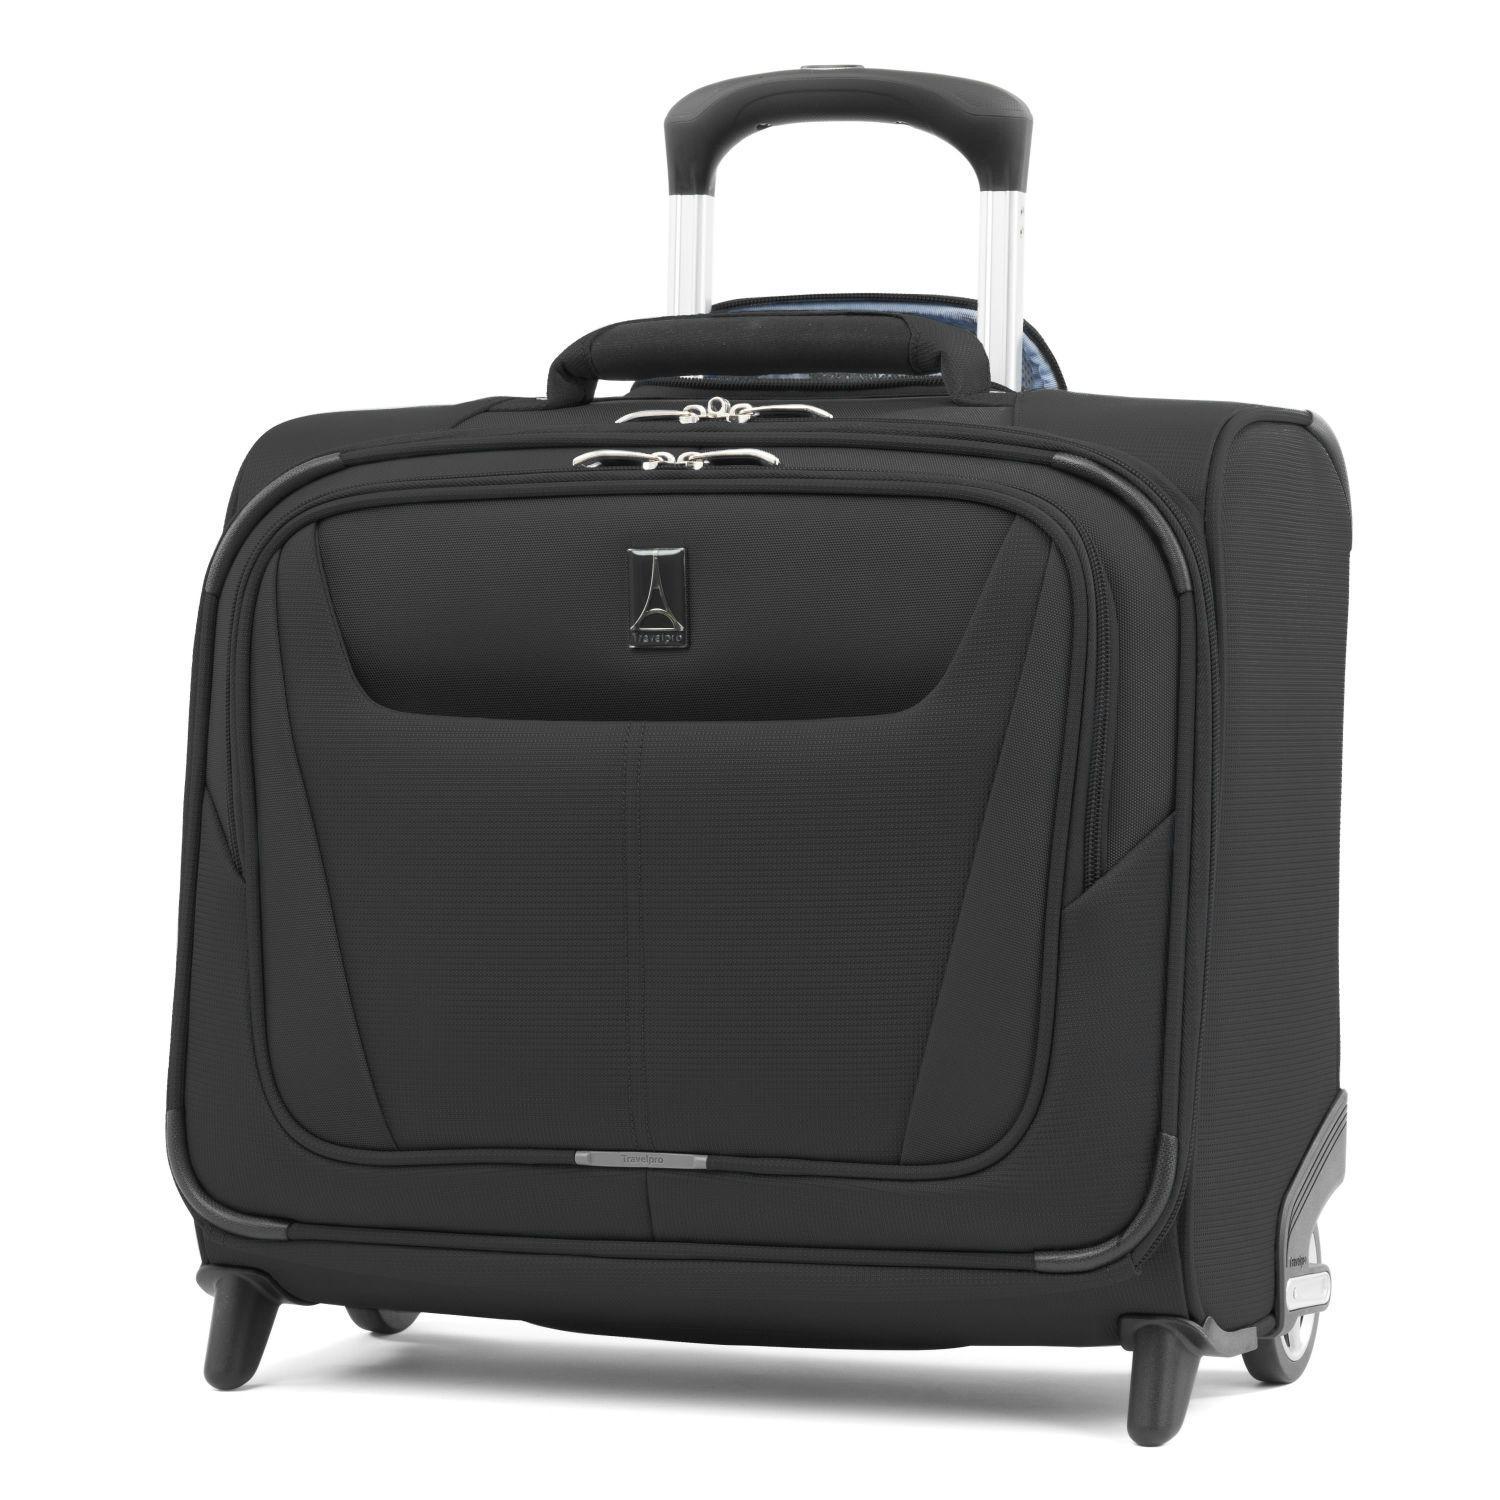 Travelpro Maxlite 5 Rolling Tote, Black, One Size